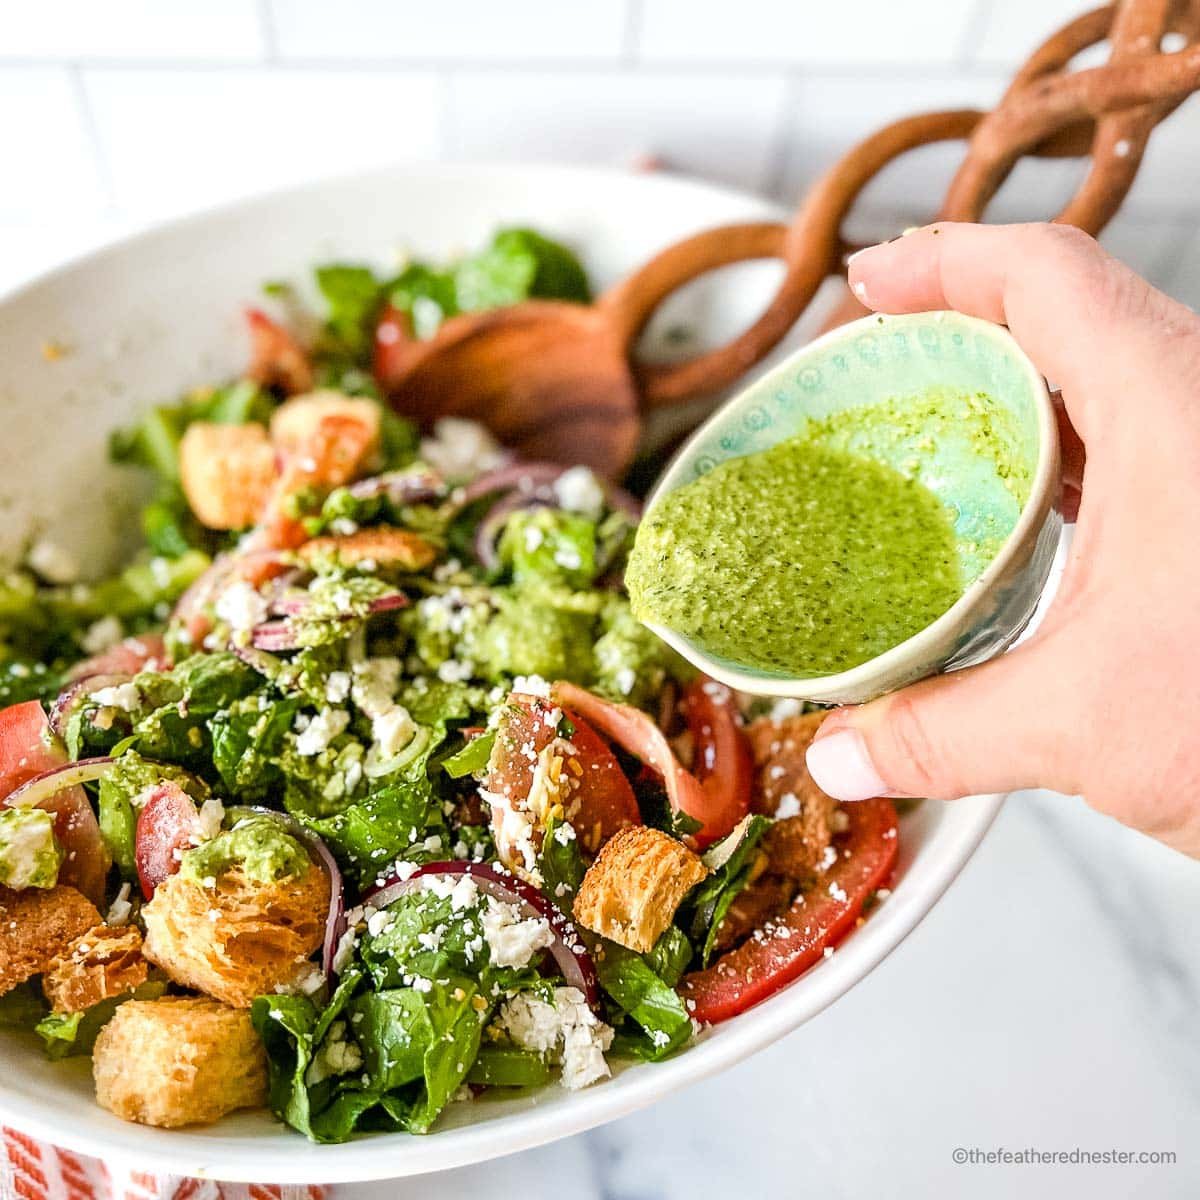 a hand holding a small bowl of pesto vinaigrette pouring into a bowl of salad.